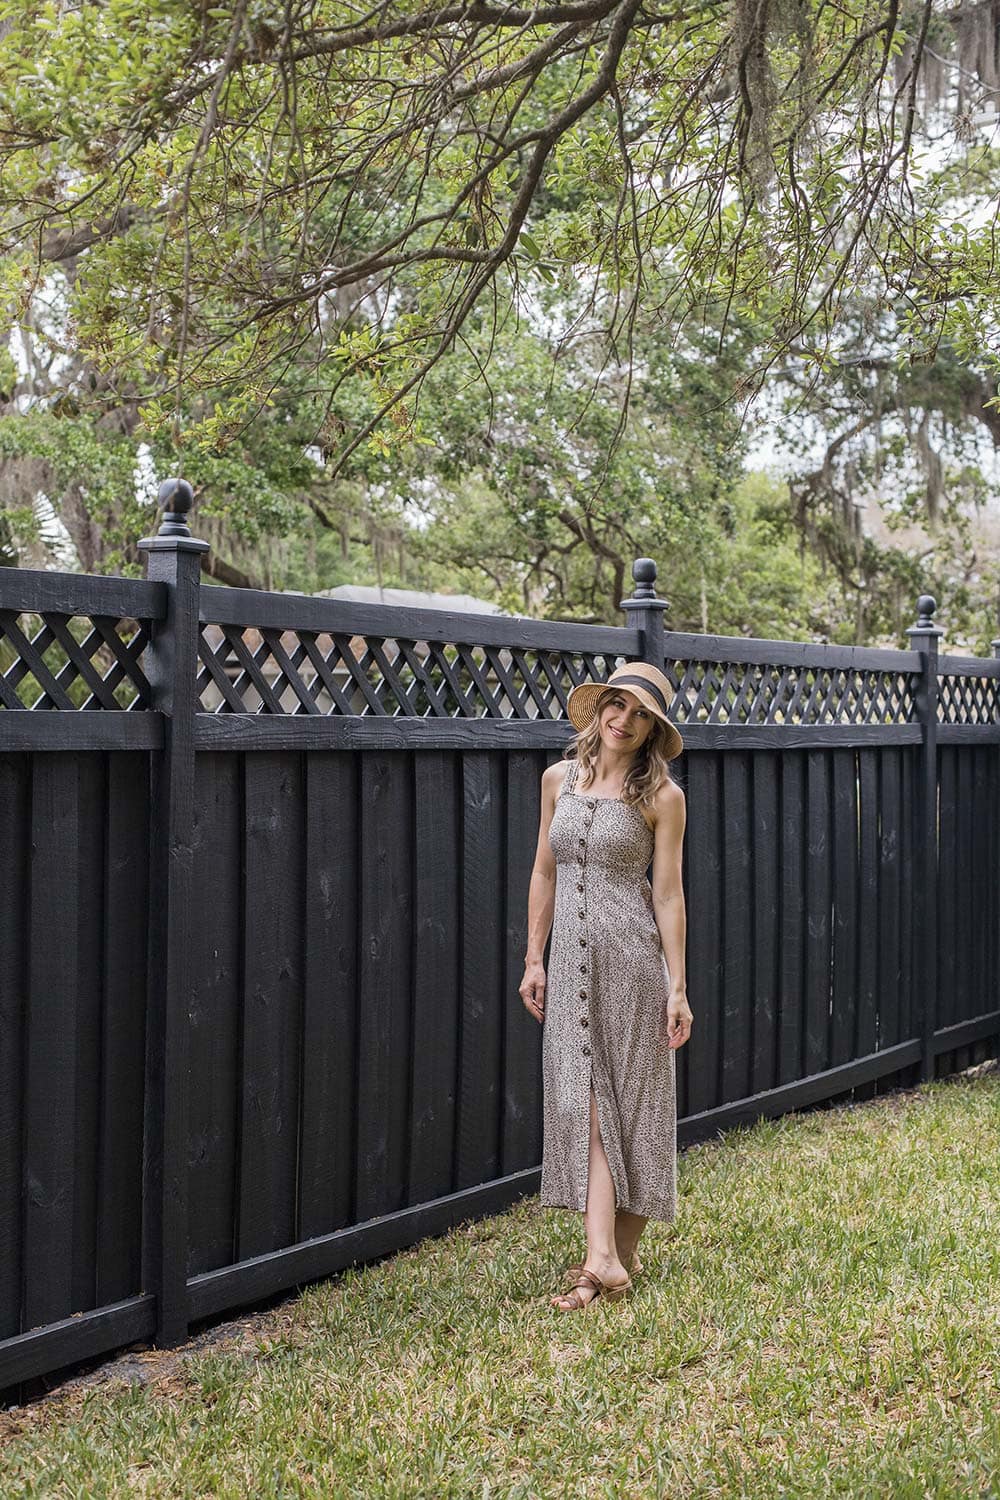 standing next to black wood fence